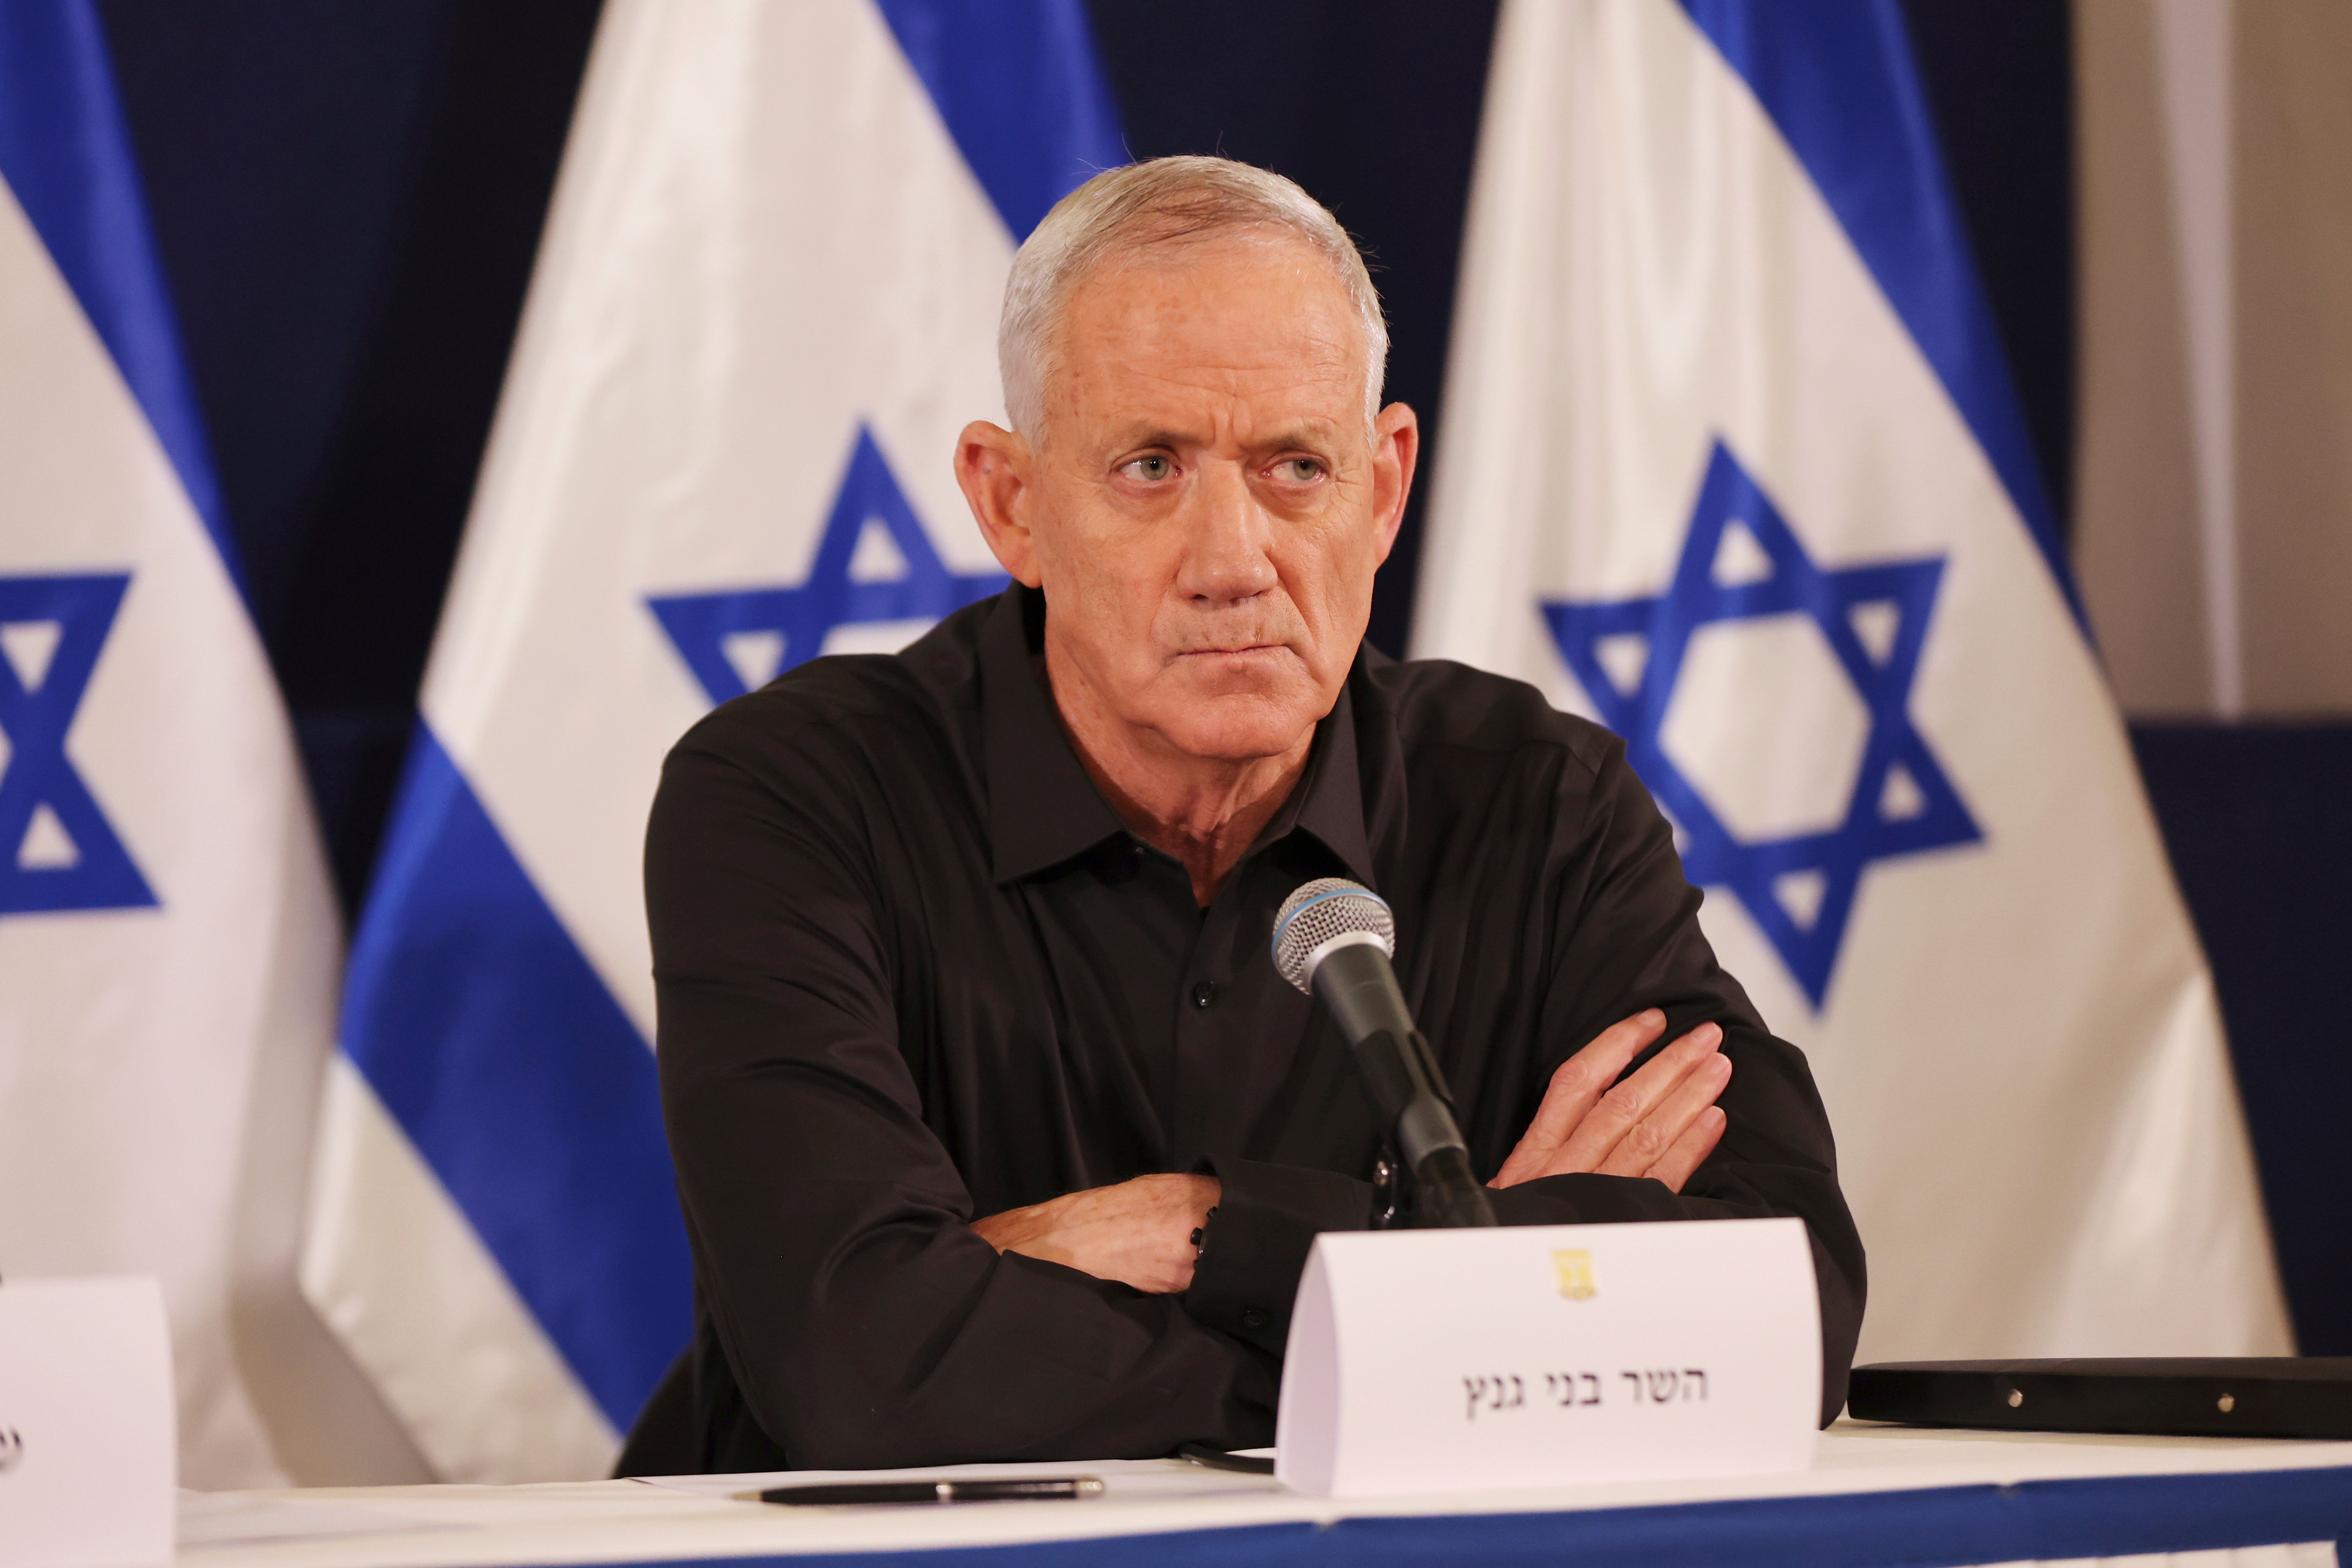 Benny Gantz has threatened to open a second front in southern Lebanon